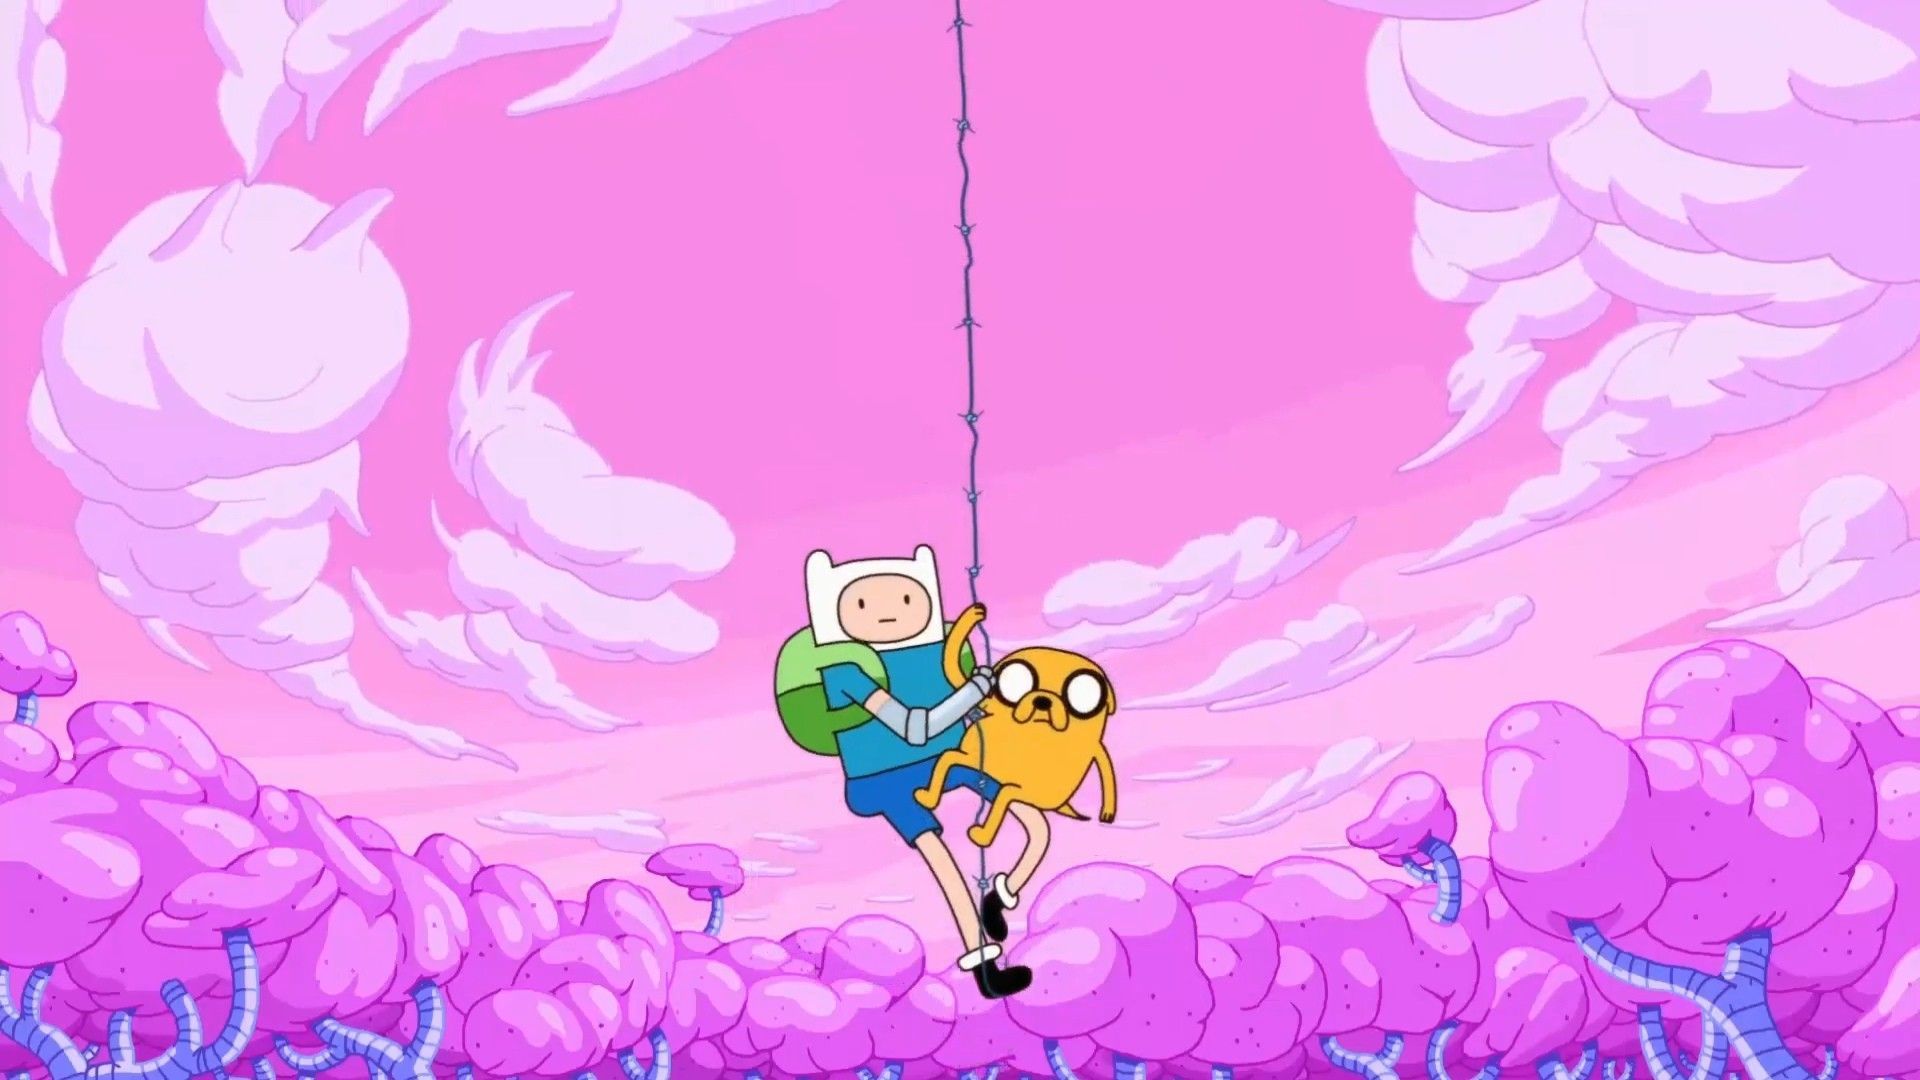 Finn and Jake Adventure Time wallpaper 1920x1080 for mobile - Adventure Time